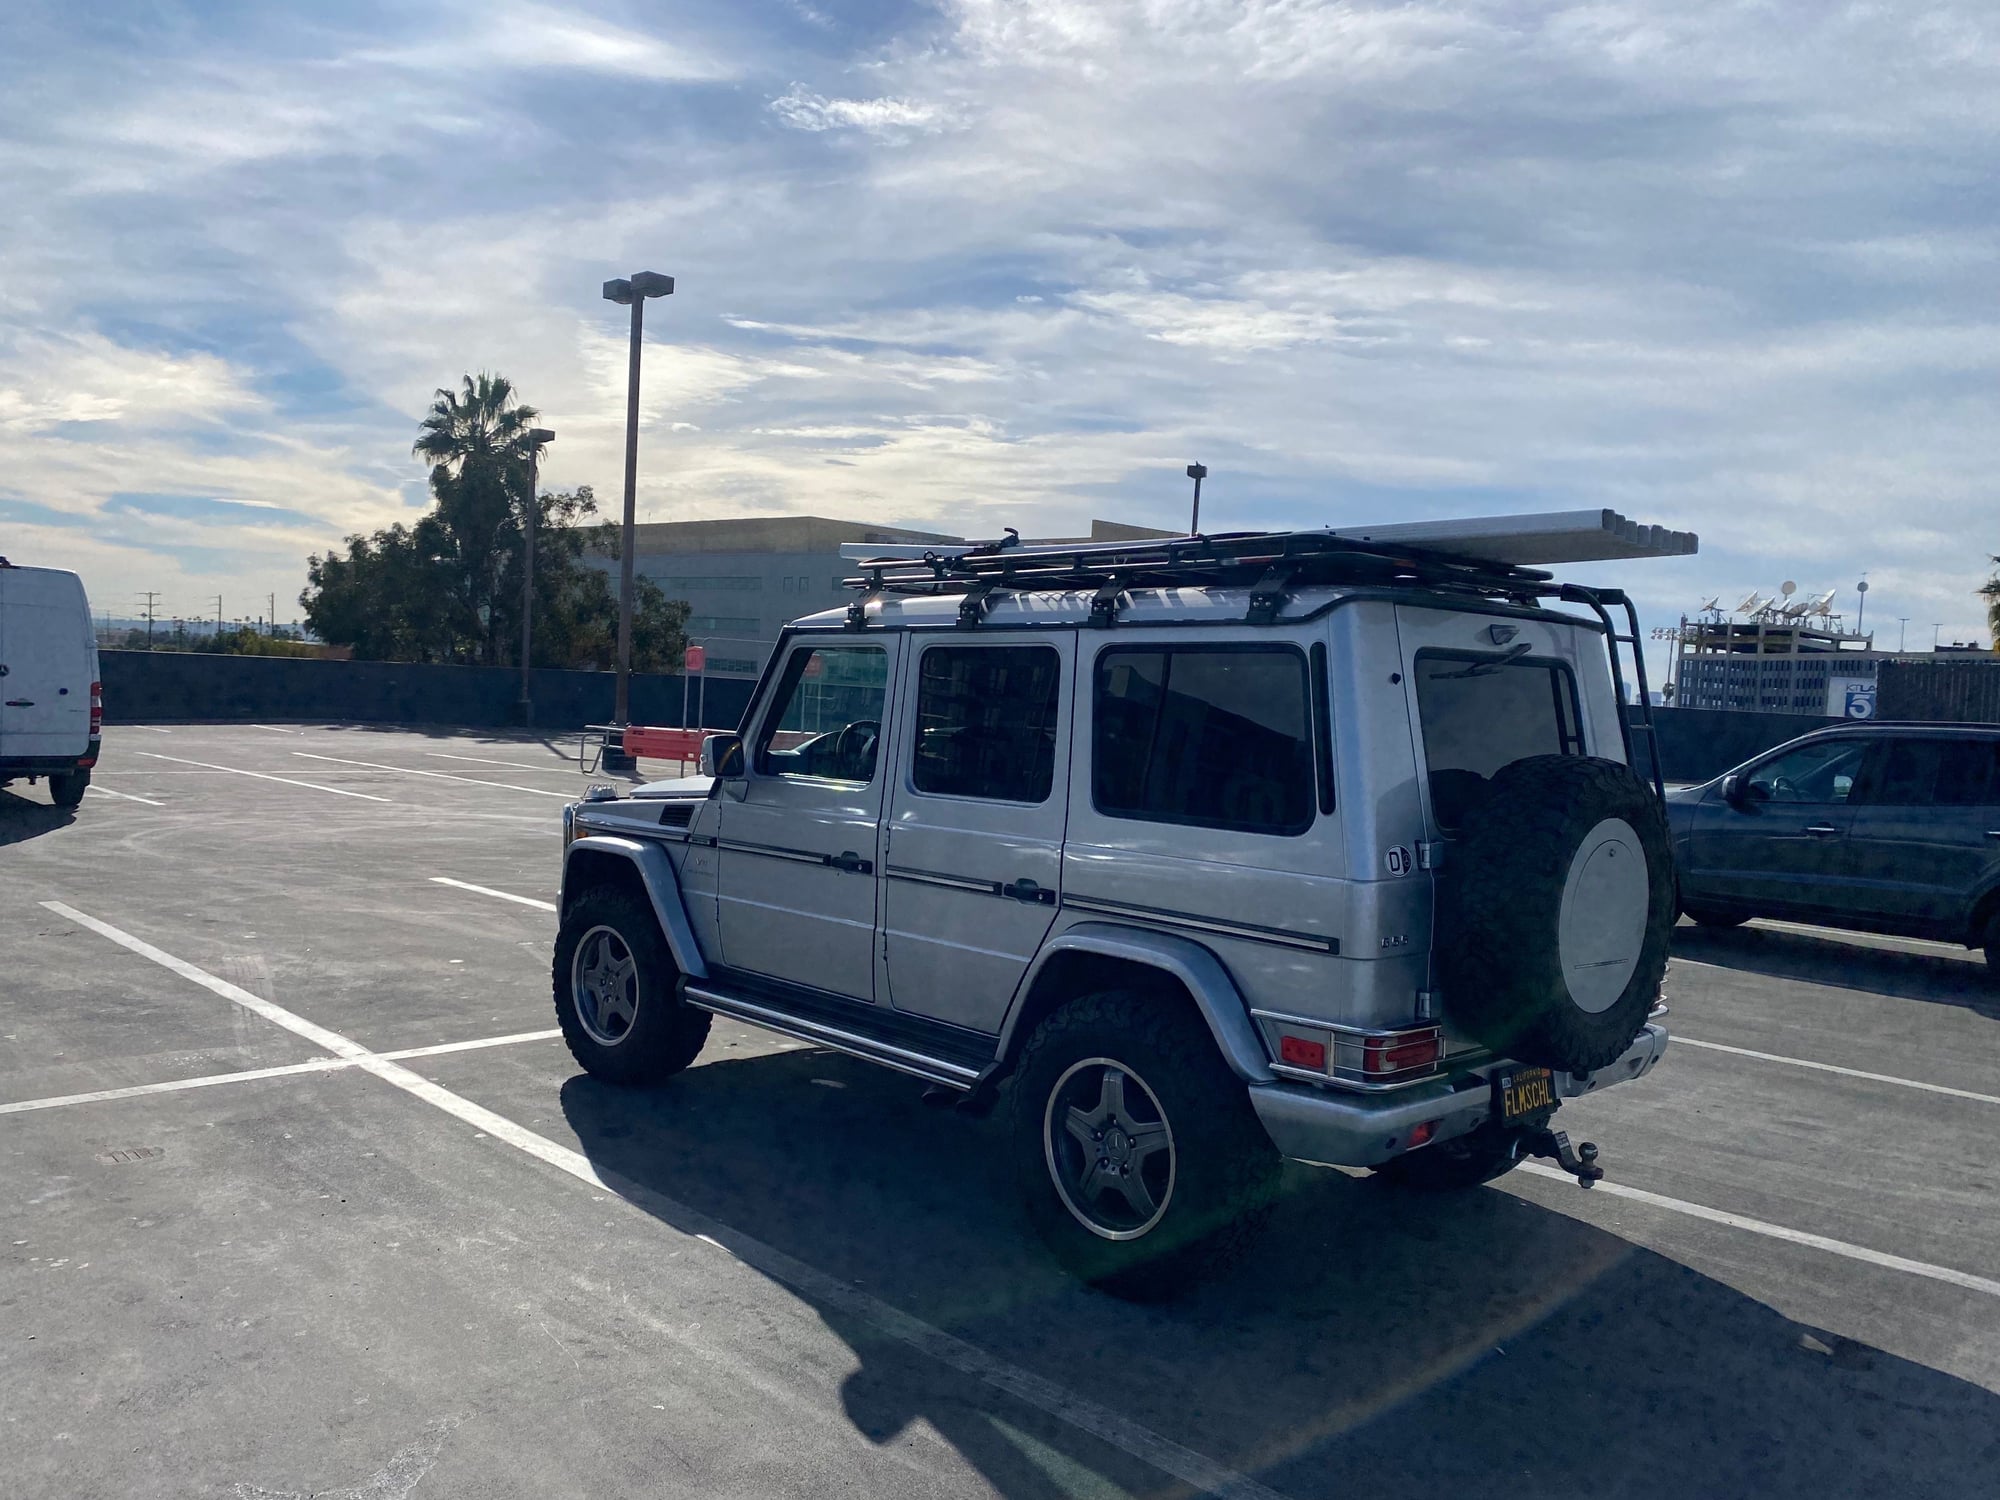 2008 Mercedes-Benz G55 AMG - 2008 G55 AMG For Sale - Used - VIN WDCYR71E88X171247 - 95,000 Miles - 8 cyl - AWD - Automatic - SUV - Silver - Los Angeles, CA 90026, United States